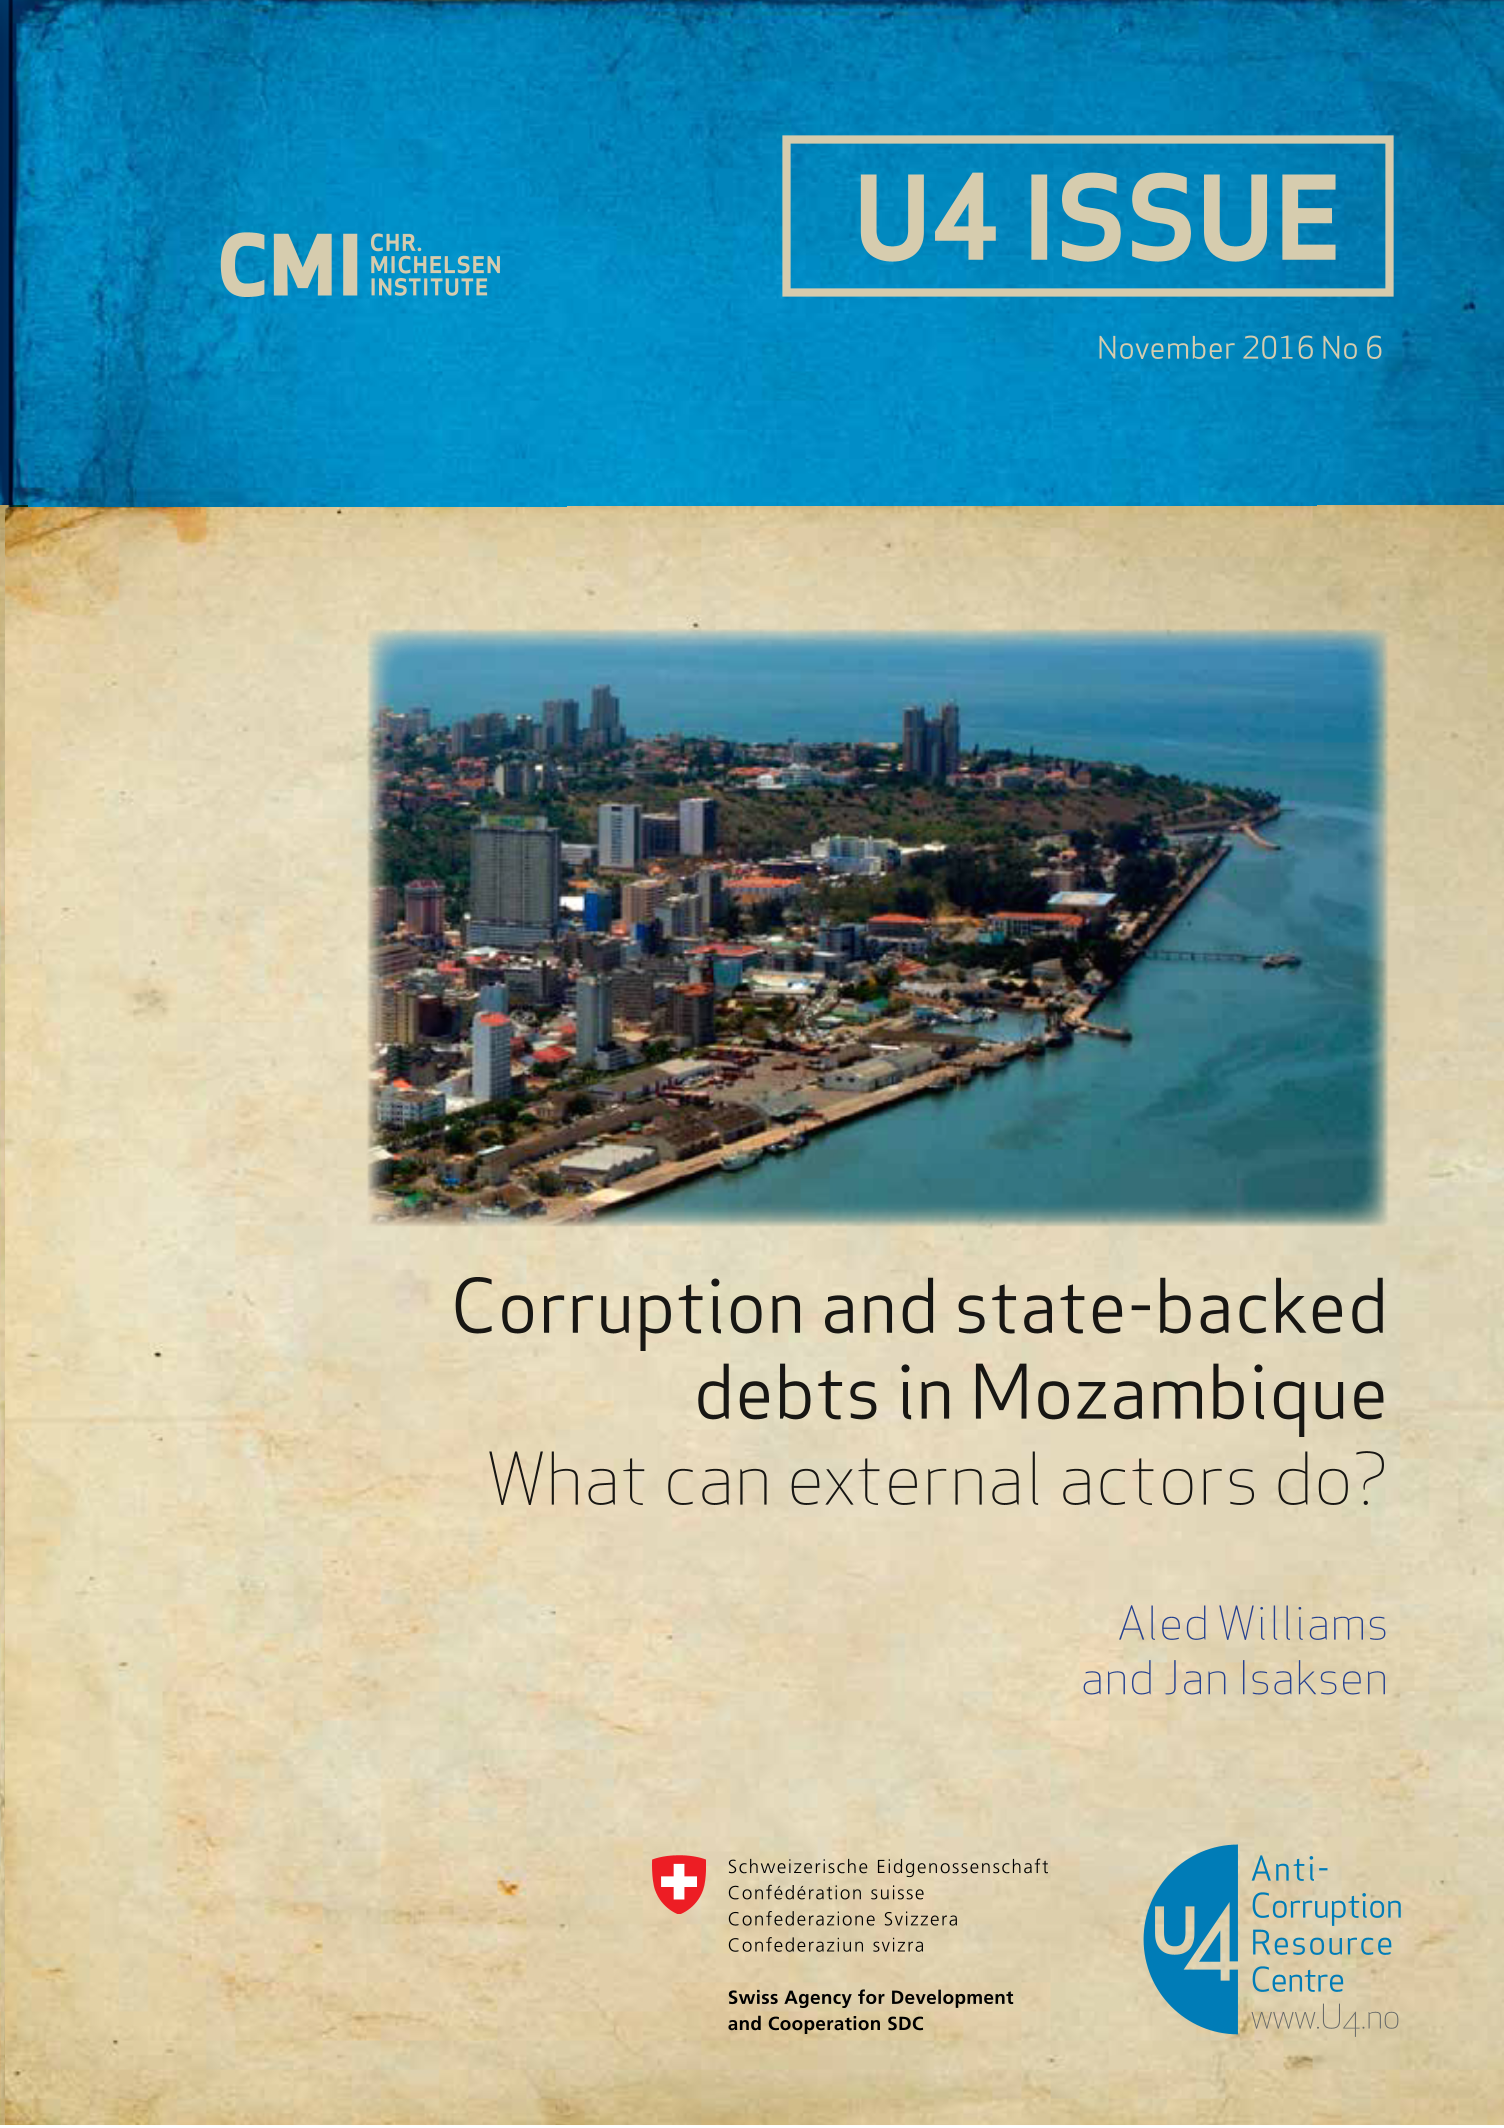 Corruption and state-backed debts in Mozambique: What can external actors do?